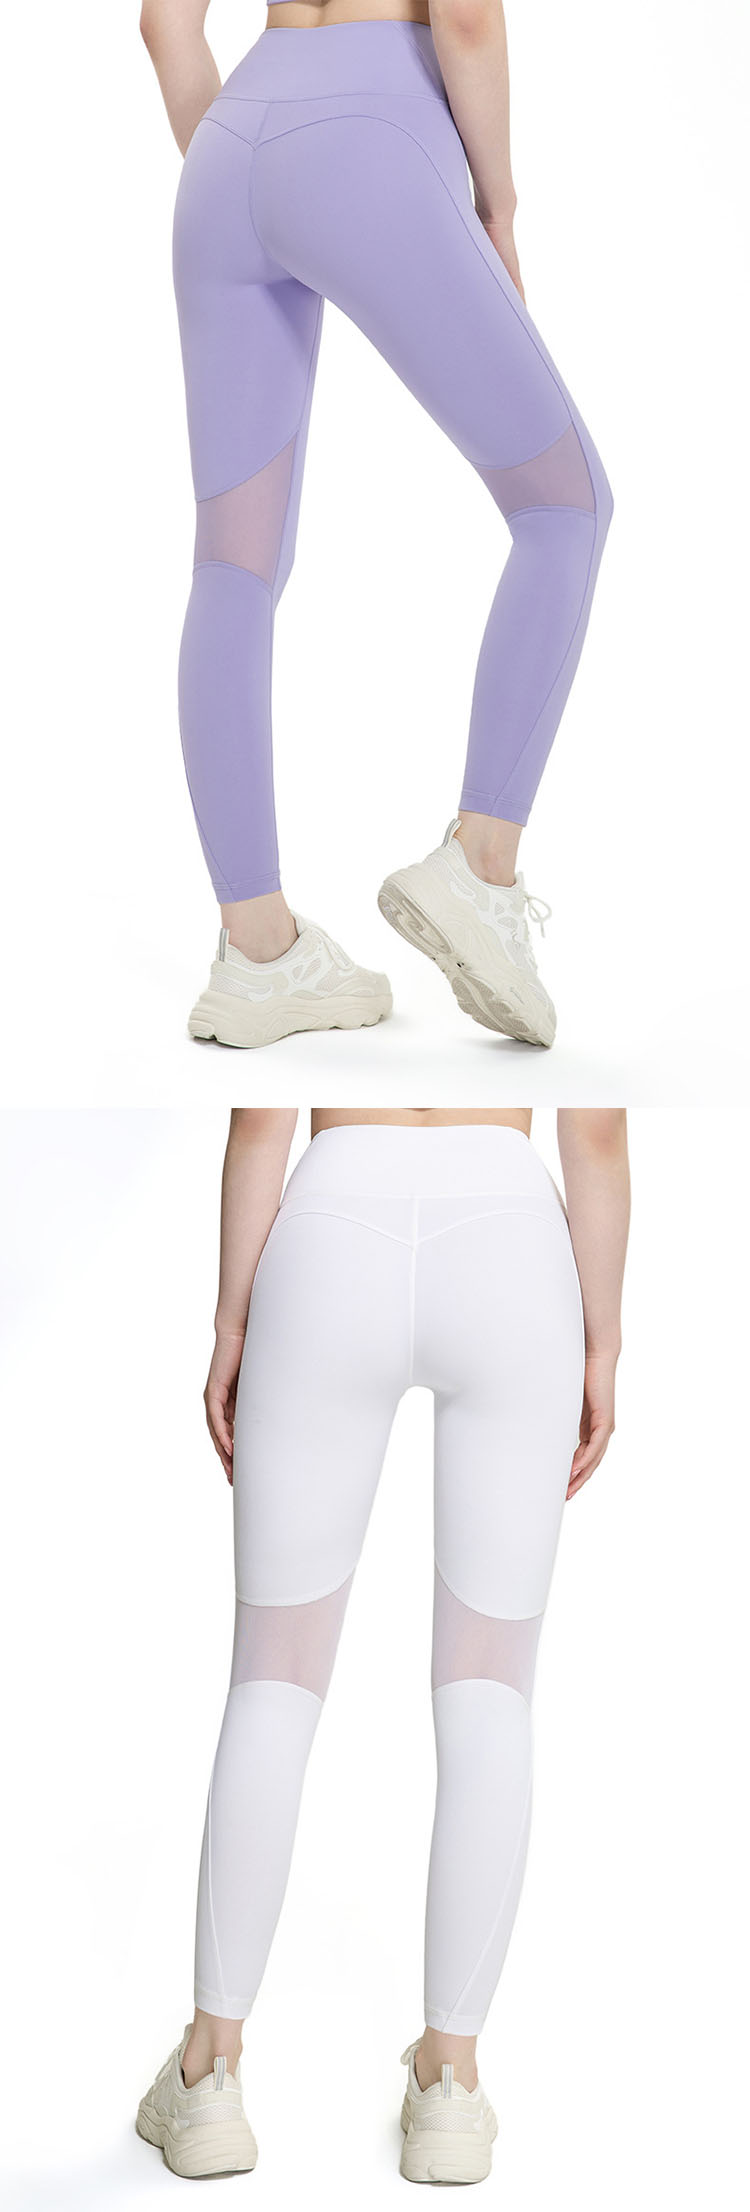 Paneled mesh at the back knee allows for breathable perspiration and a snug fit.